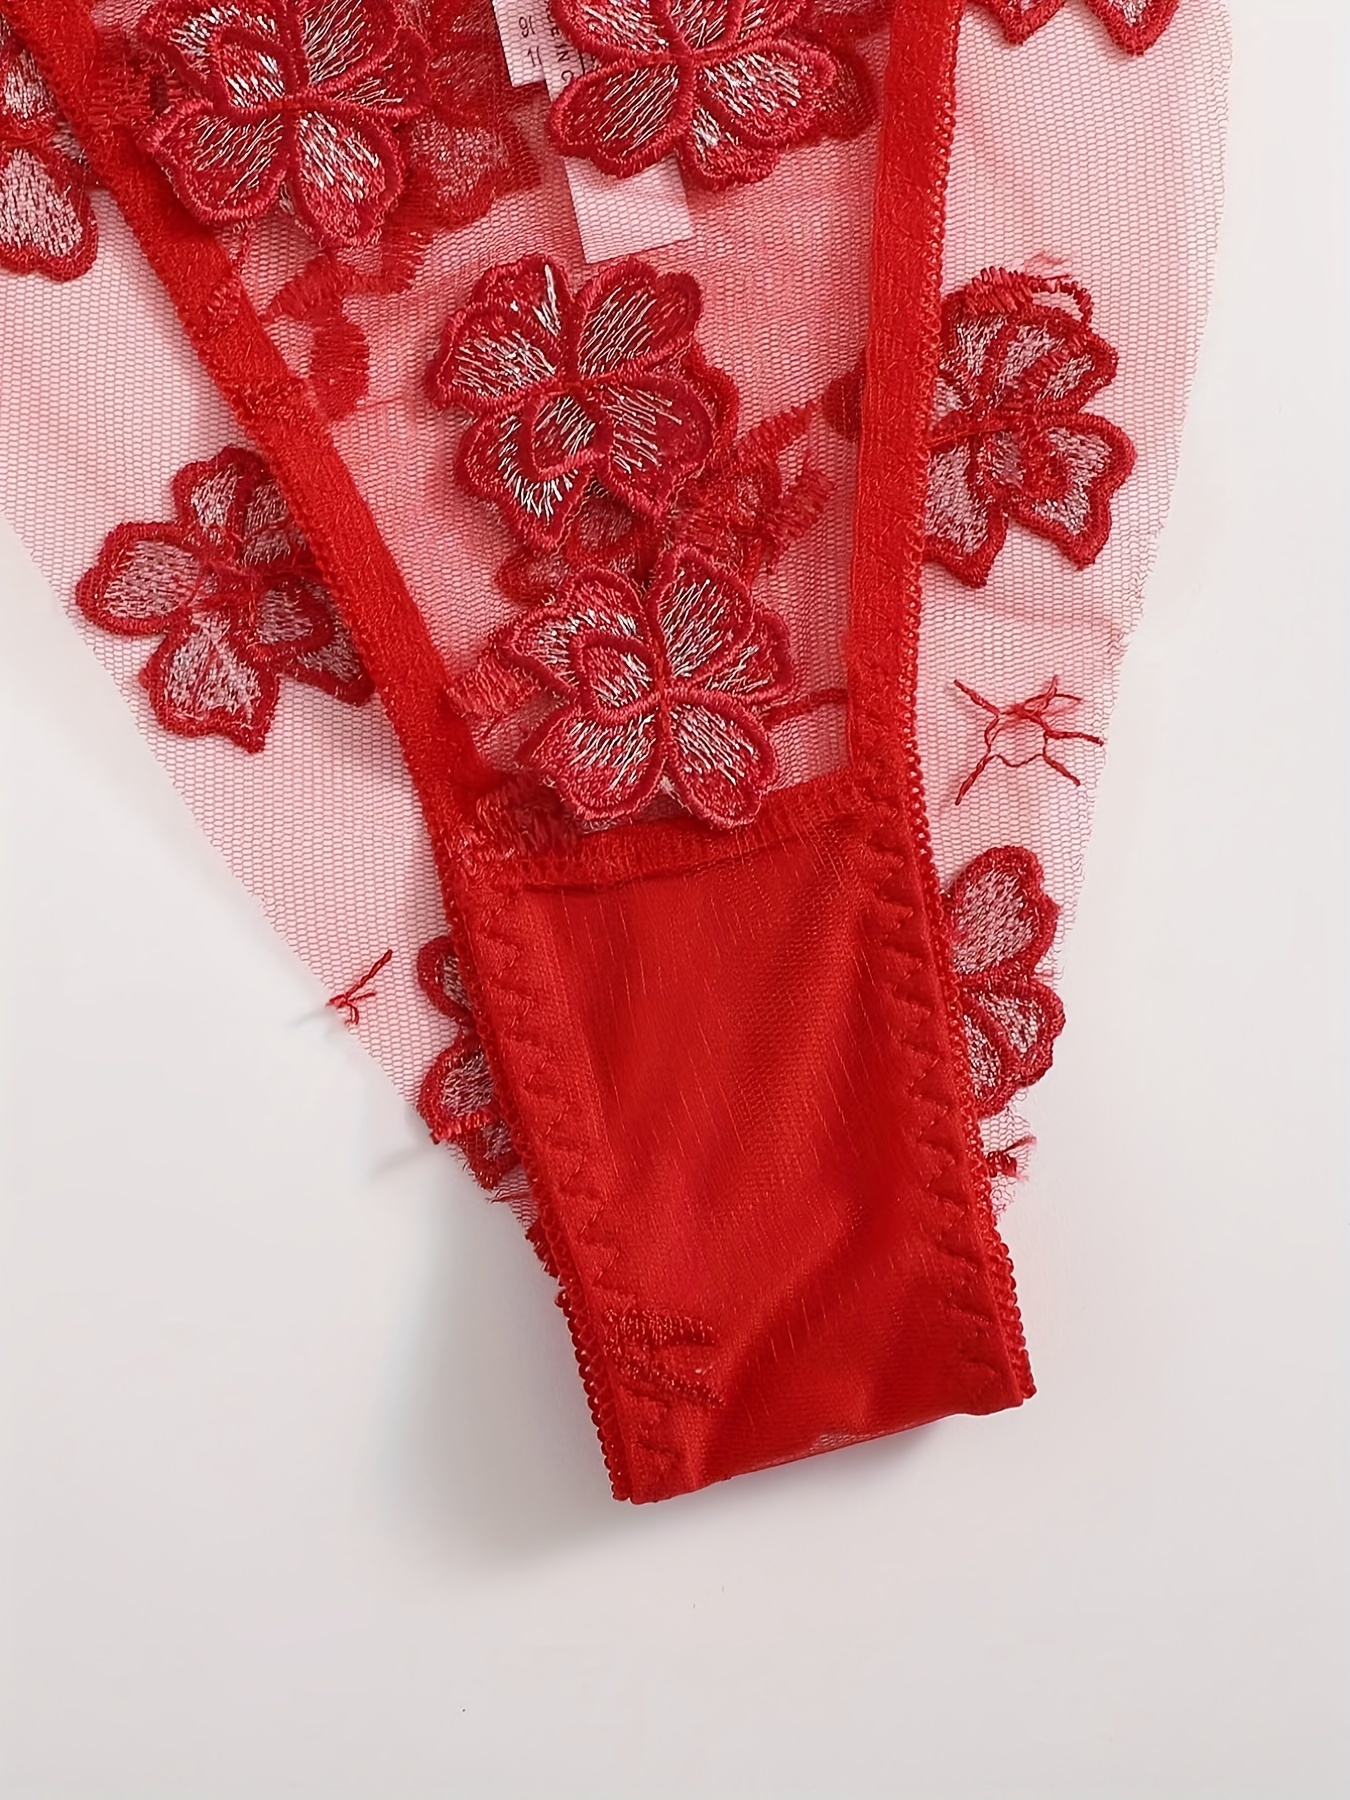 Sheer Floral Thong Red at Rs 250/piece, Mangalore